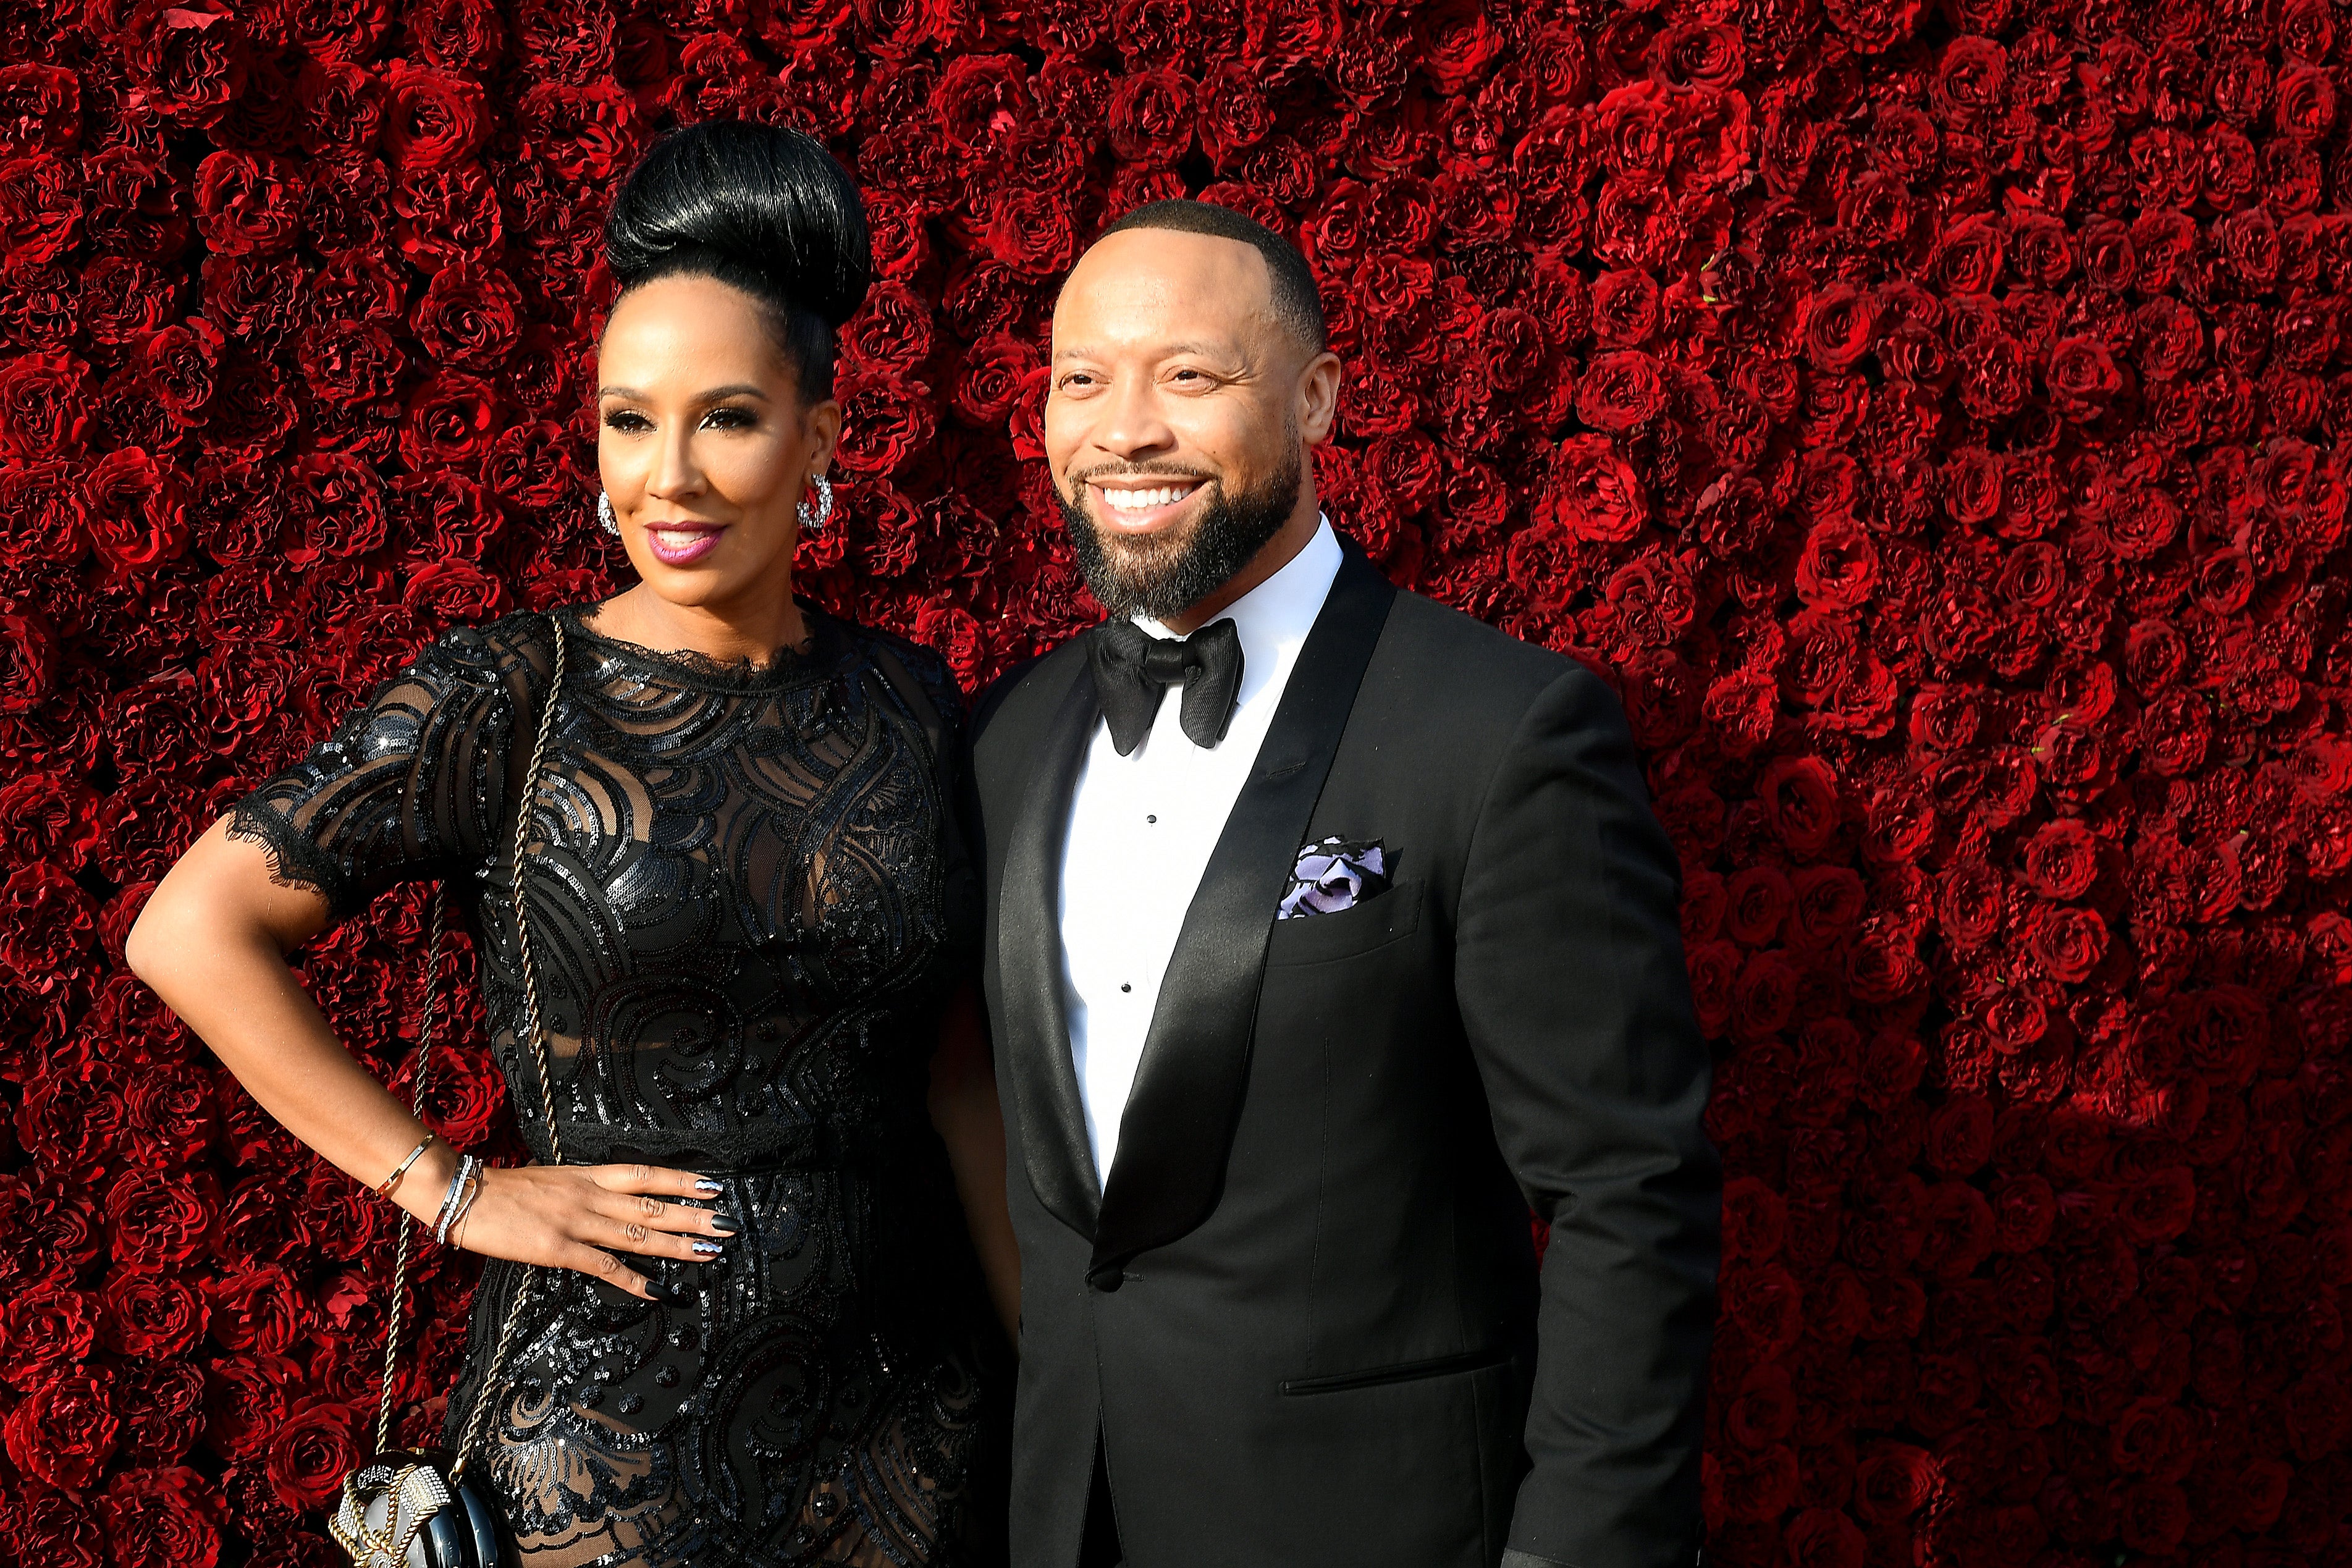 Hollywood’s Hottest Couples Showed Up and Showed Out For Tyler Perry's Grand Opening